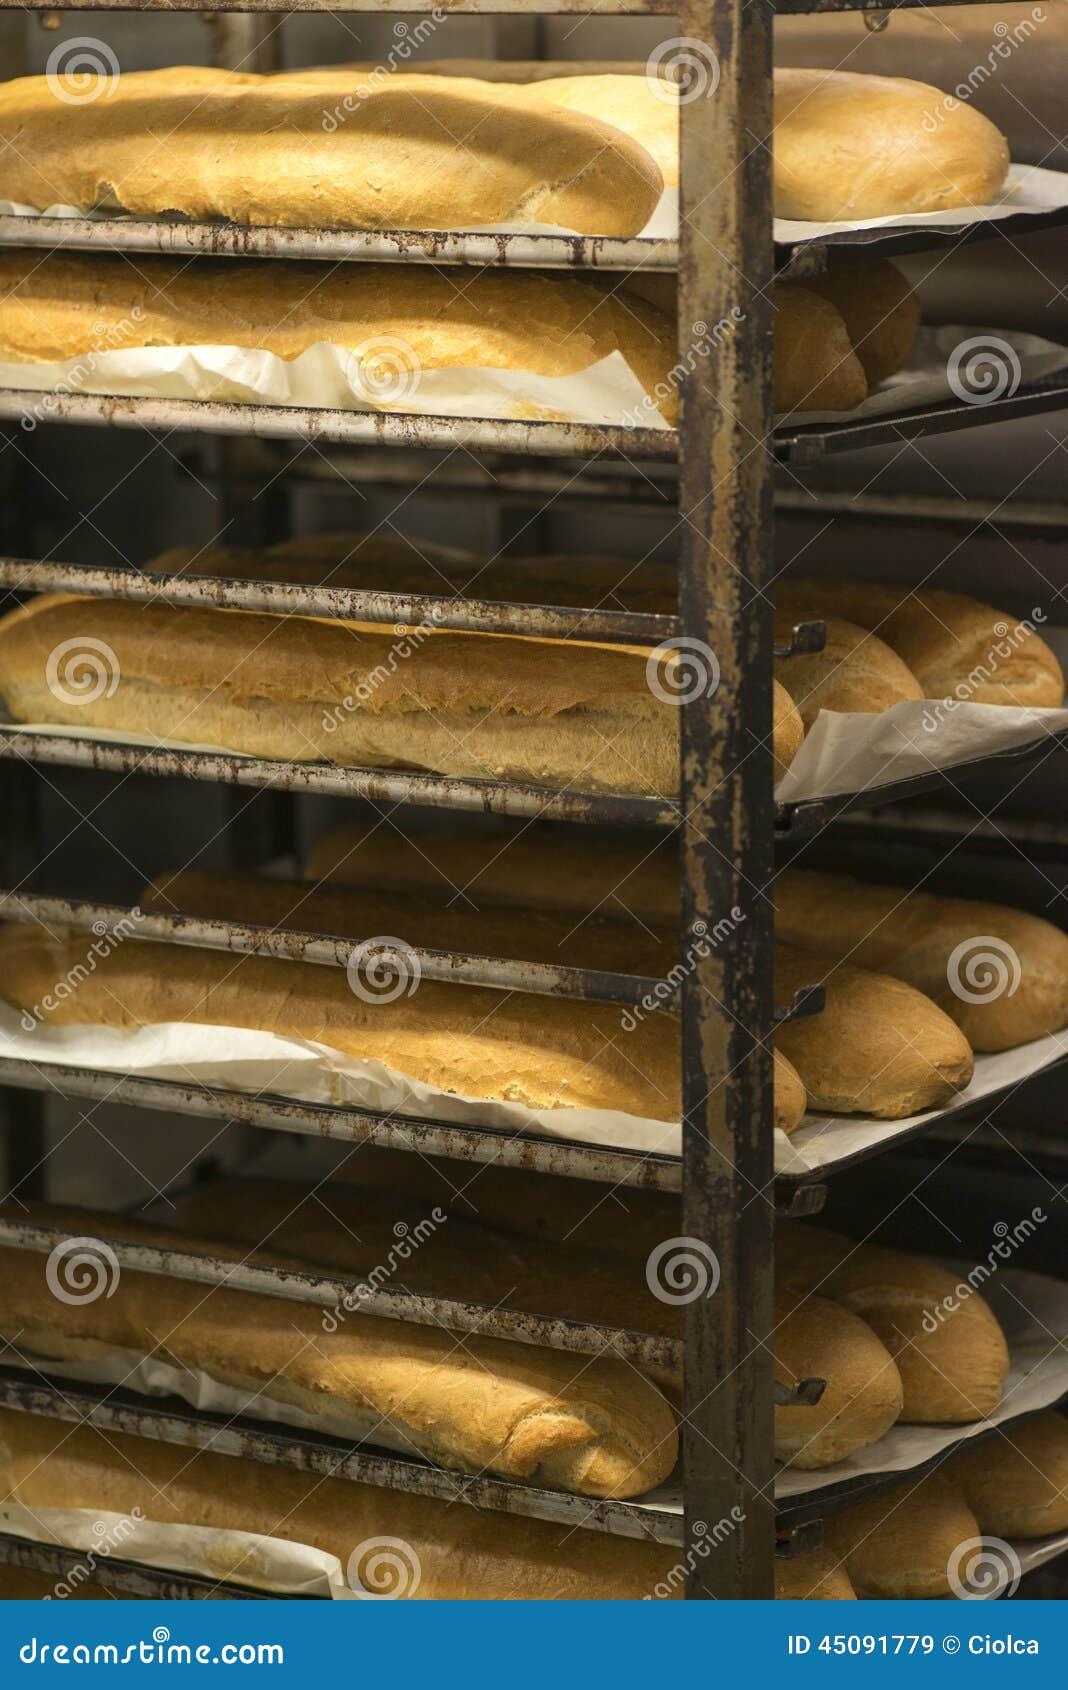 A rack of fresh baguettes in a bakery